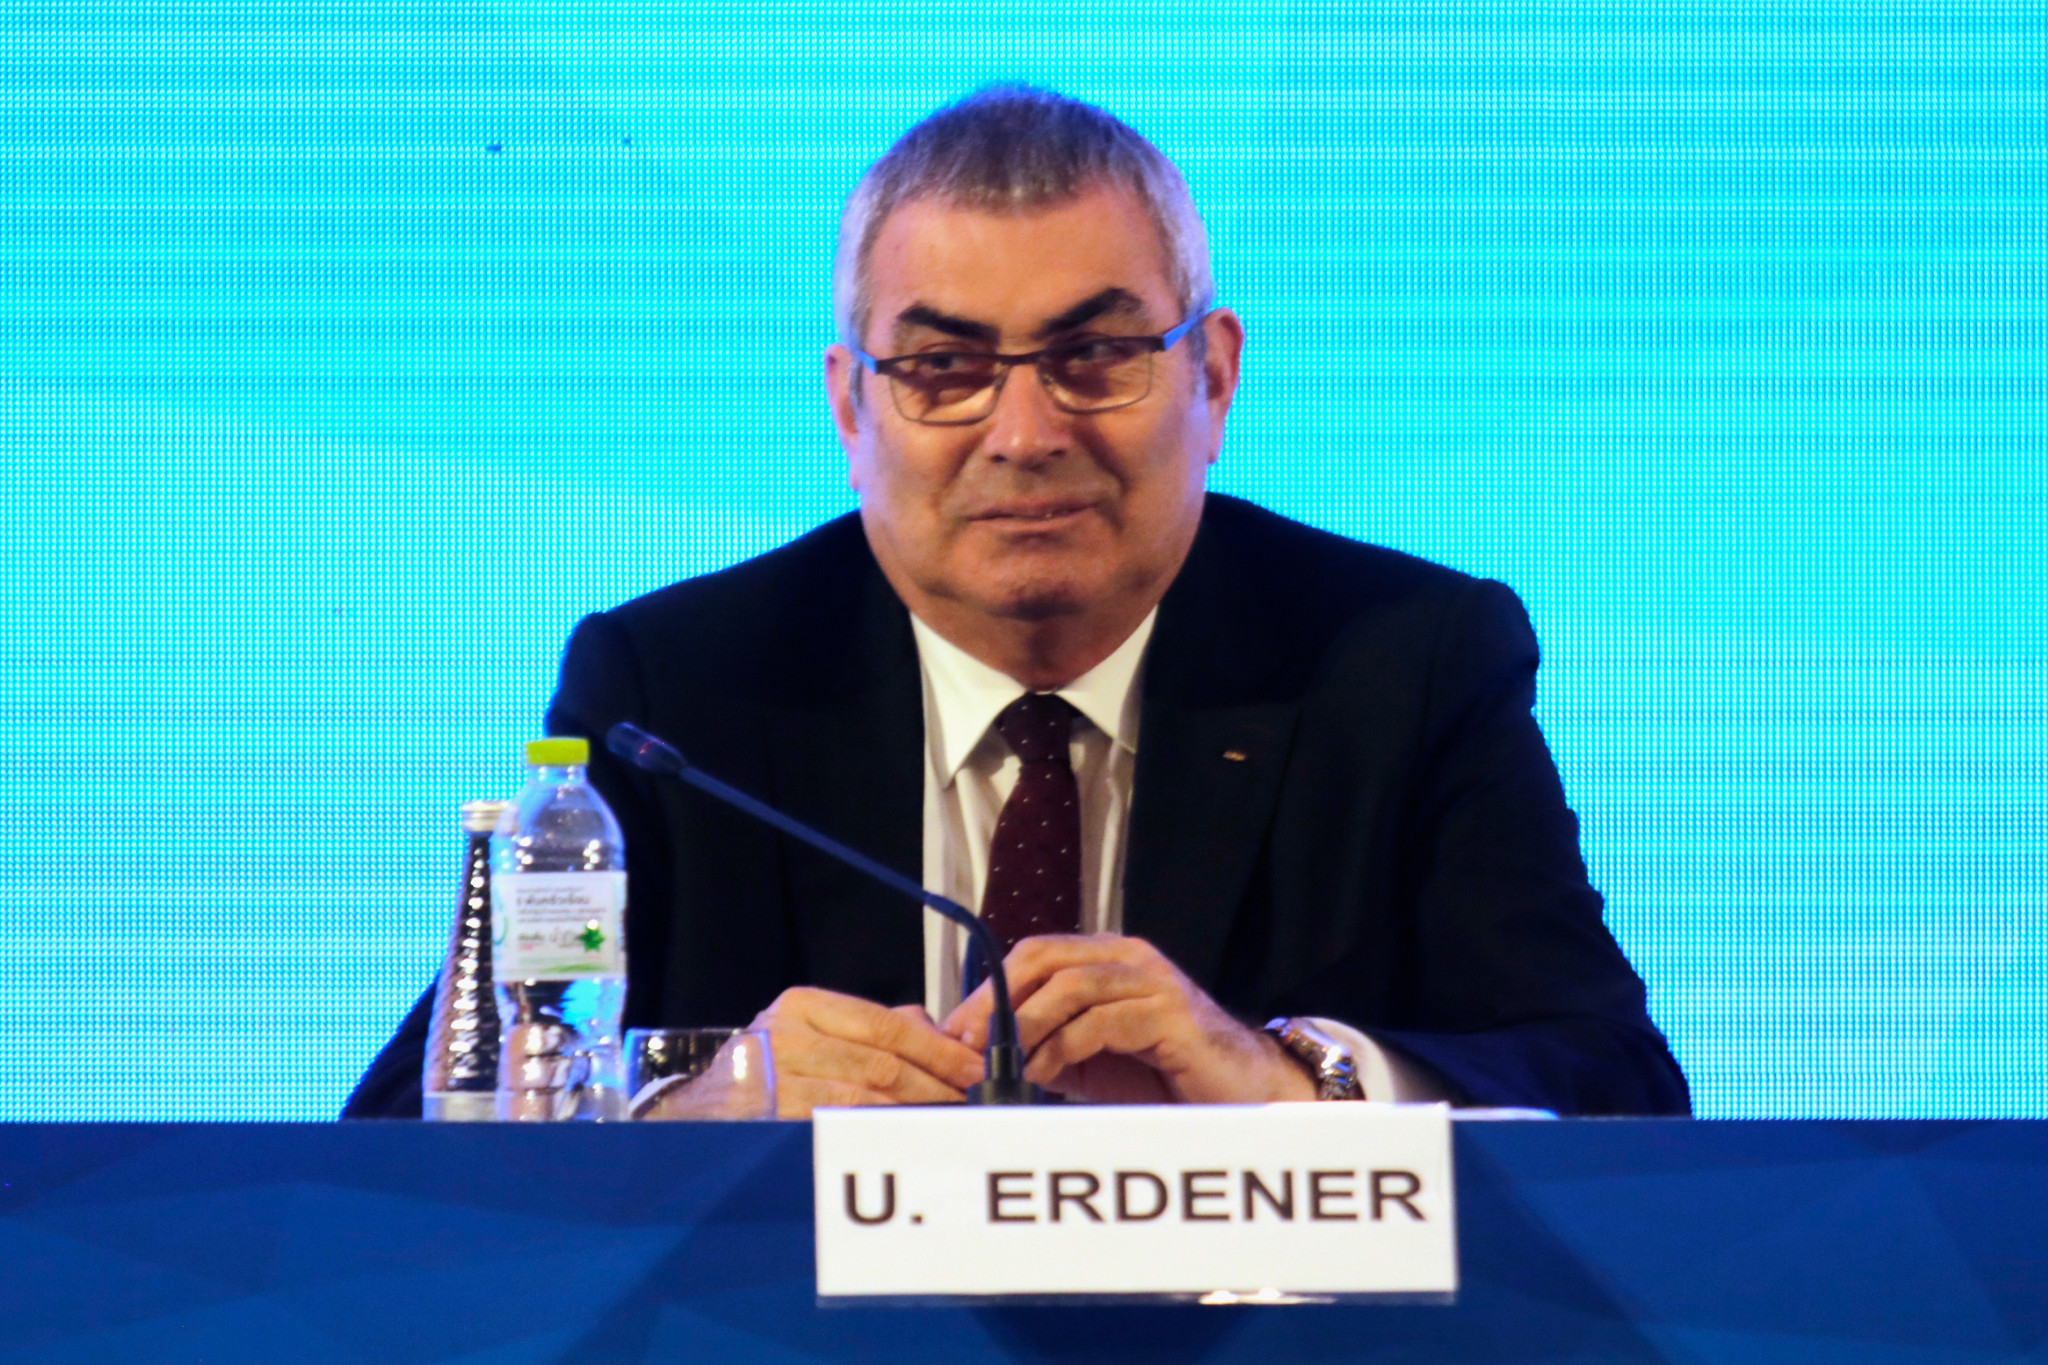 IOC vice-president Uğur Erdener has been appointed chair of the Evaluation Commission for the 2022 Summer Youth Olympic Games ©Getty Images